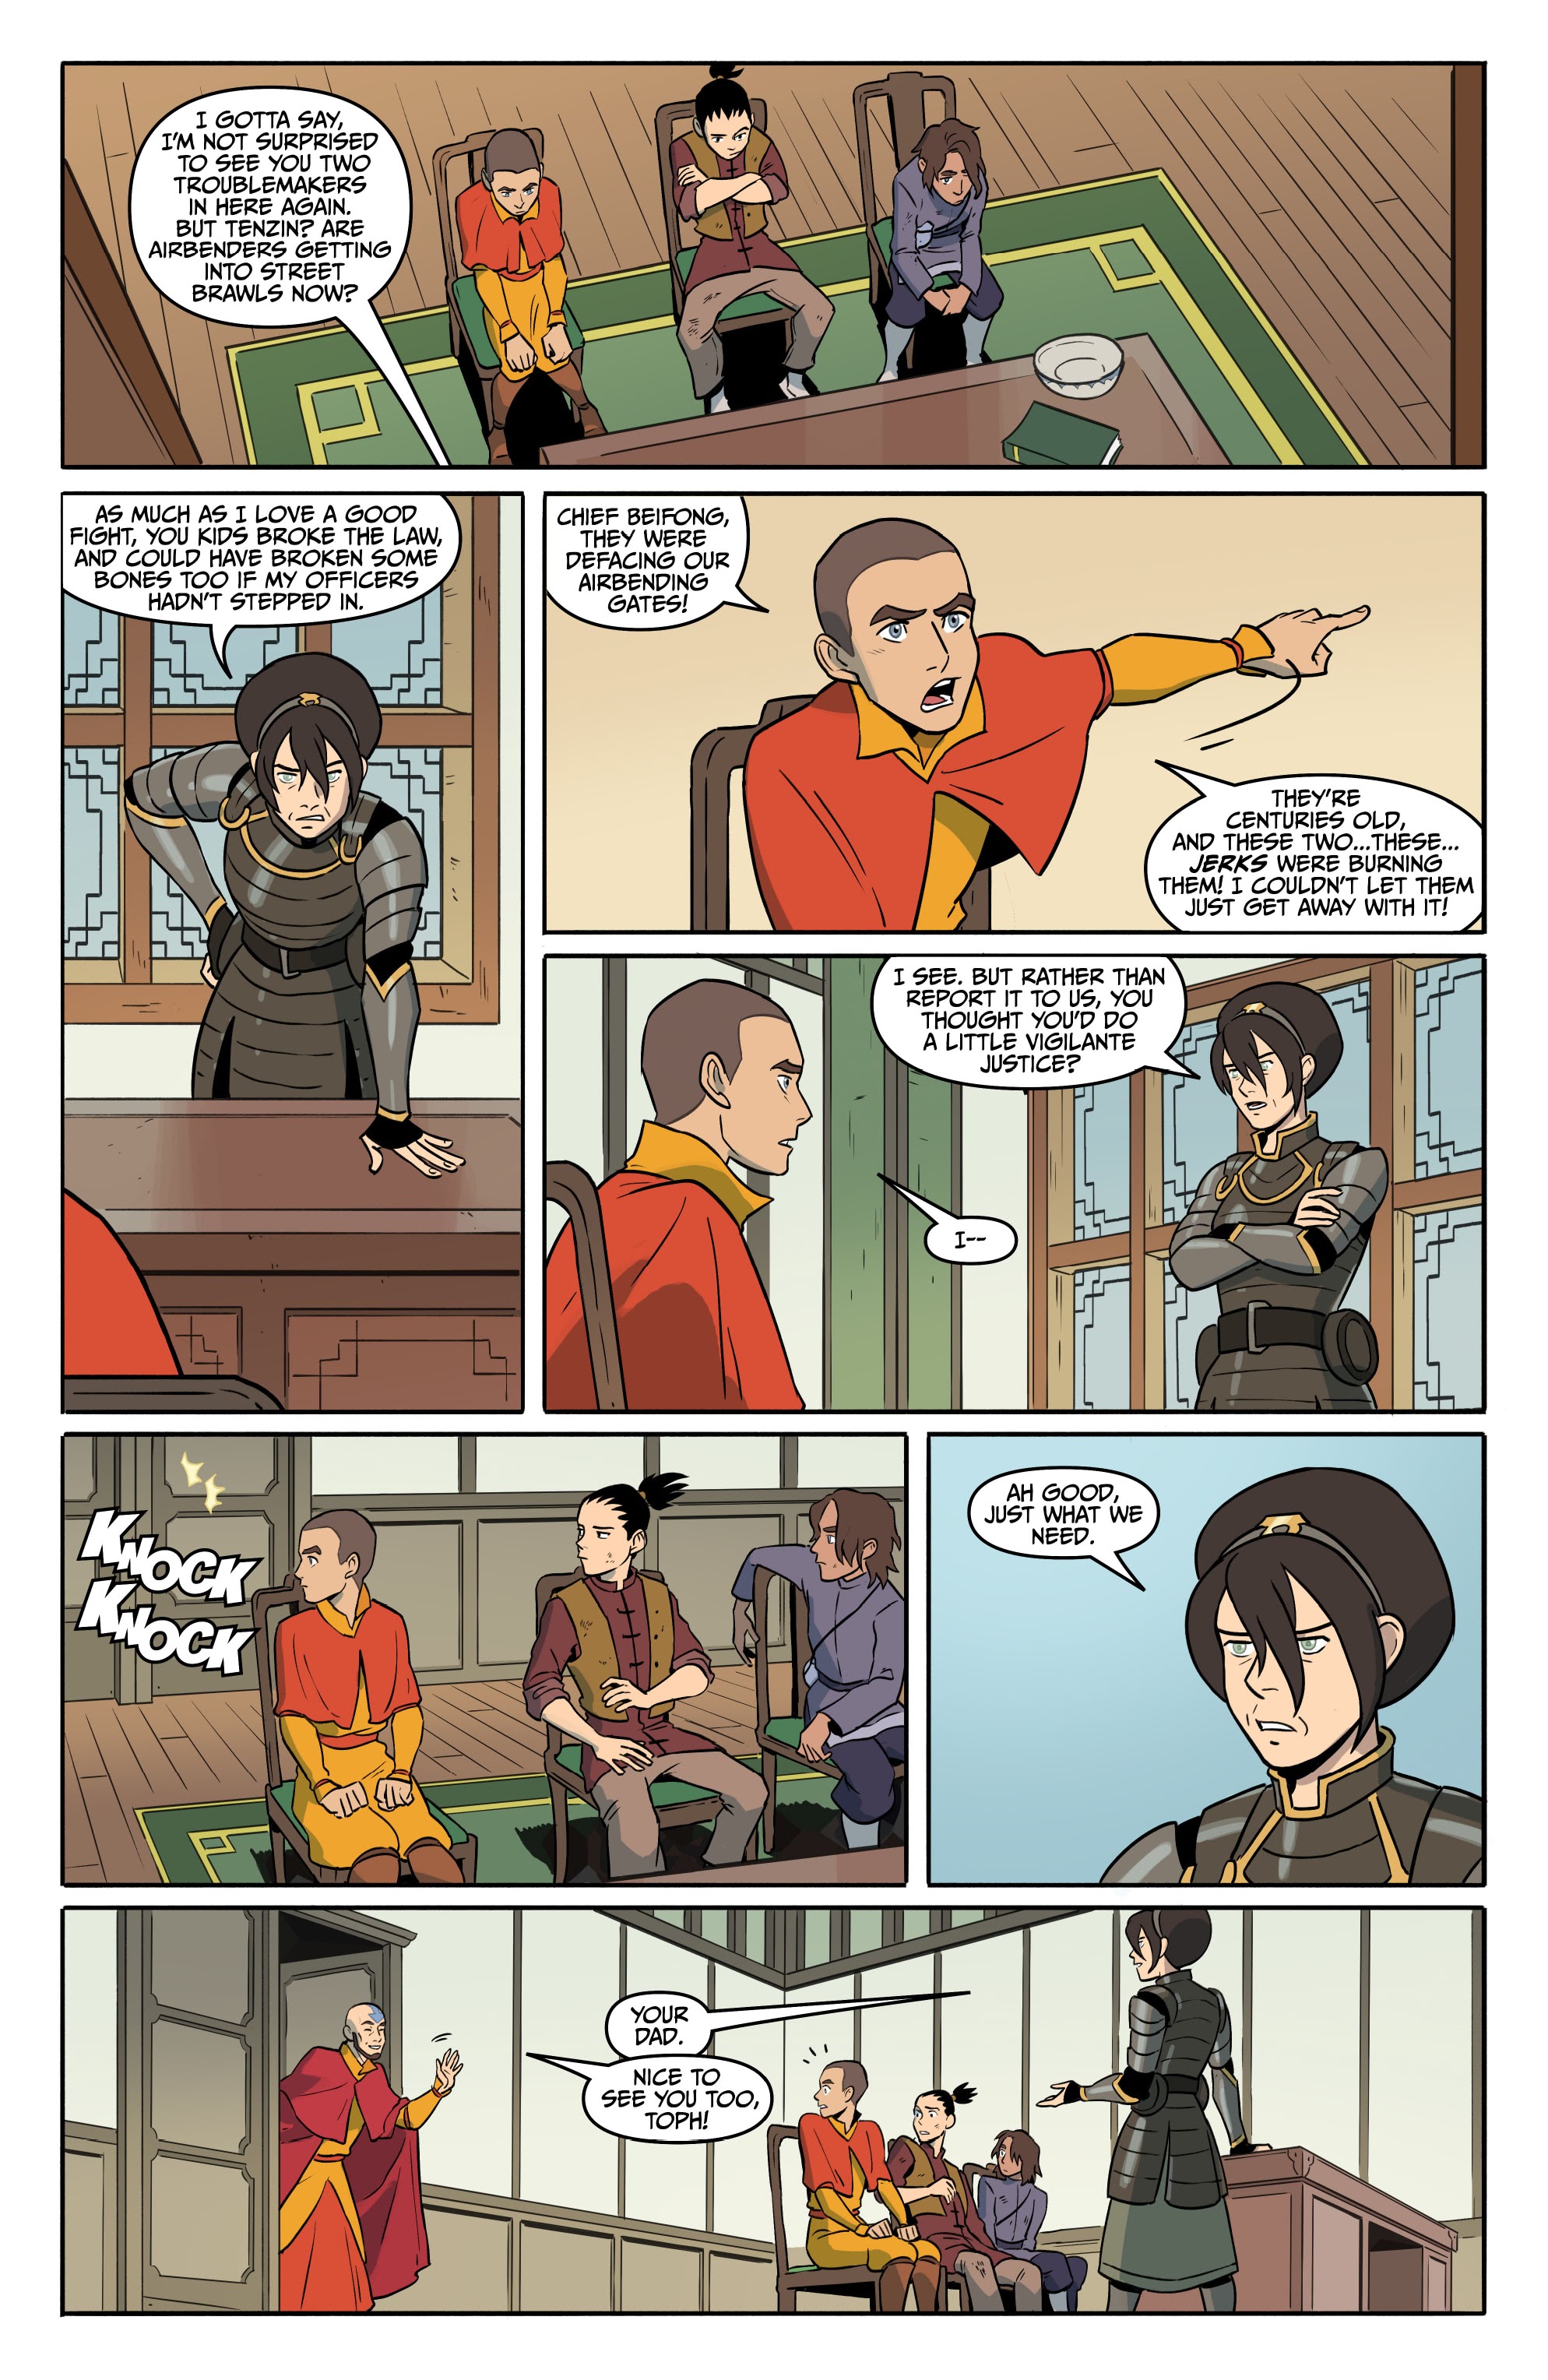 Read online Free Comic Book Day 2021 comic -  Issue # Avatar - The Last Airbender - The Legend of Korra - 8